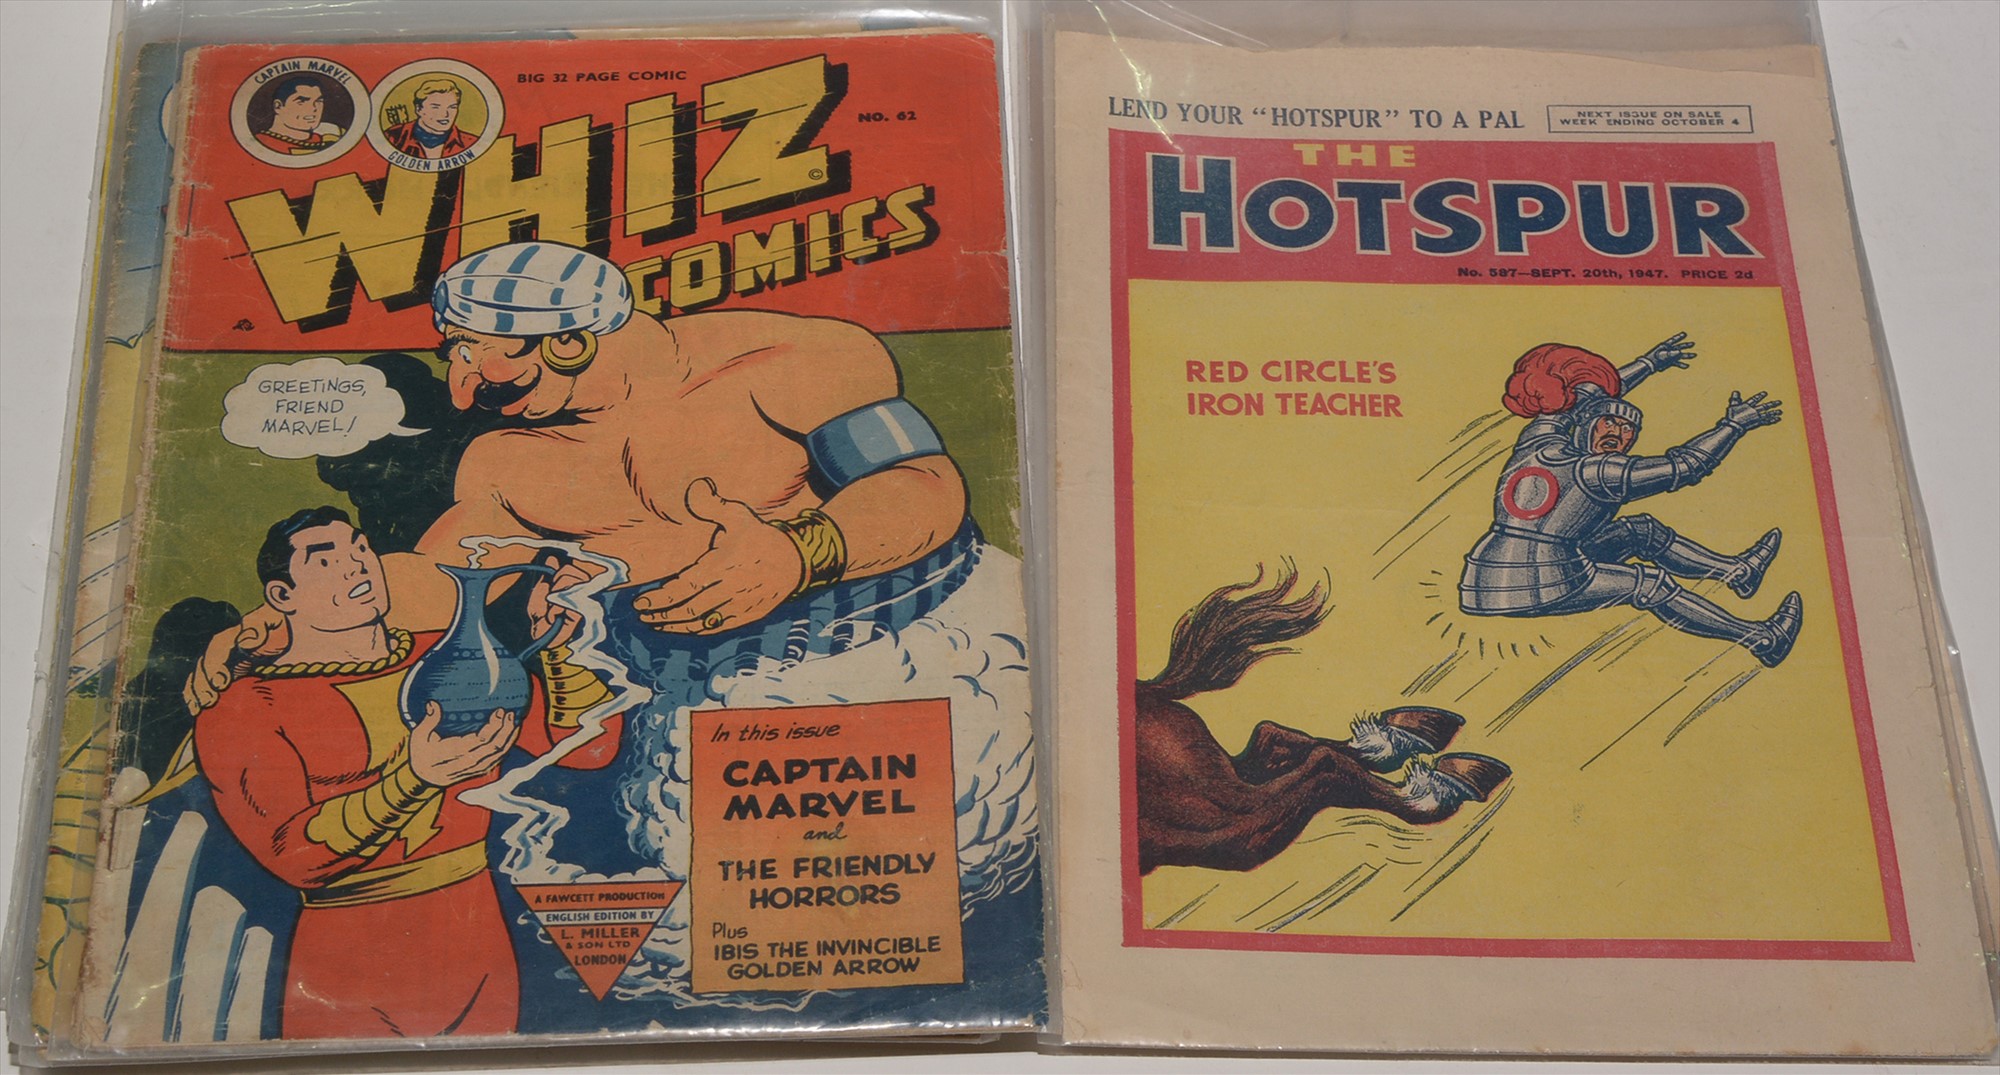 The Wizard 1946/57 (x 3); The Hotspur No. 587, September 1947. (4), also Whizz Comics (L. Miller)